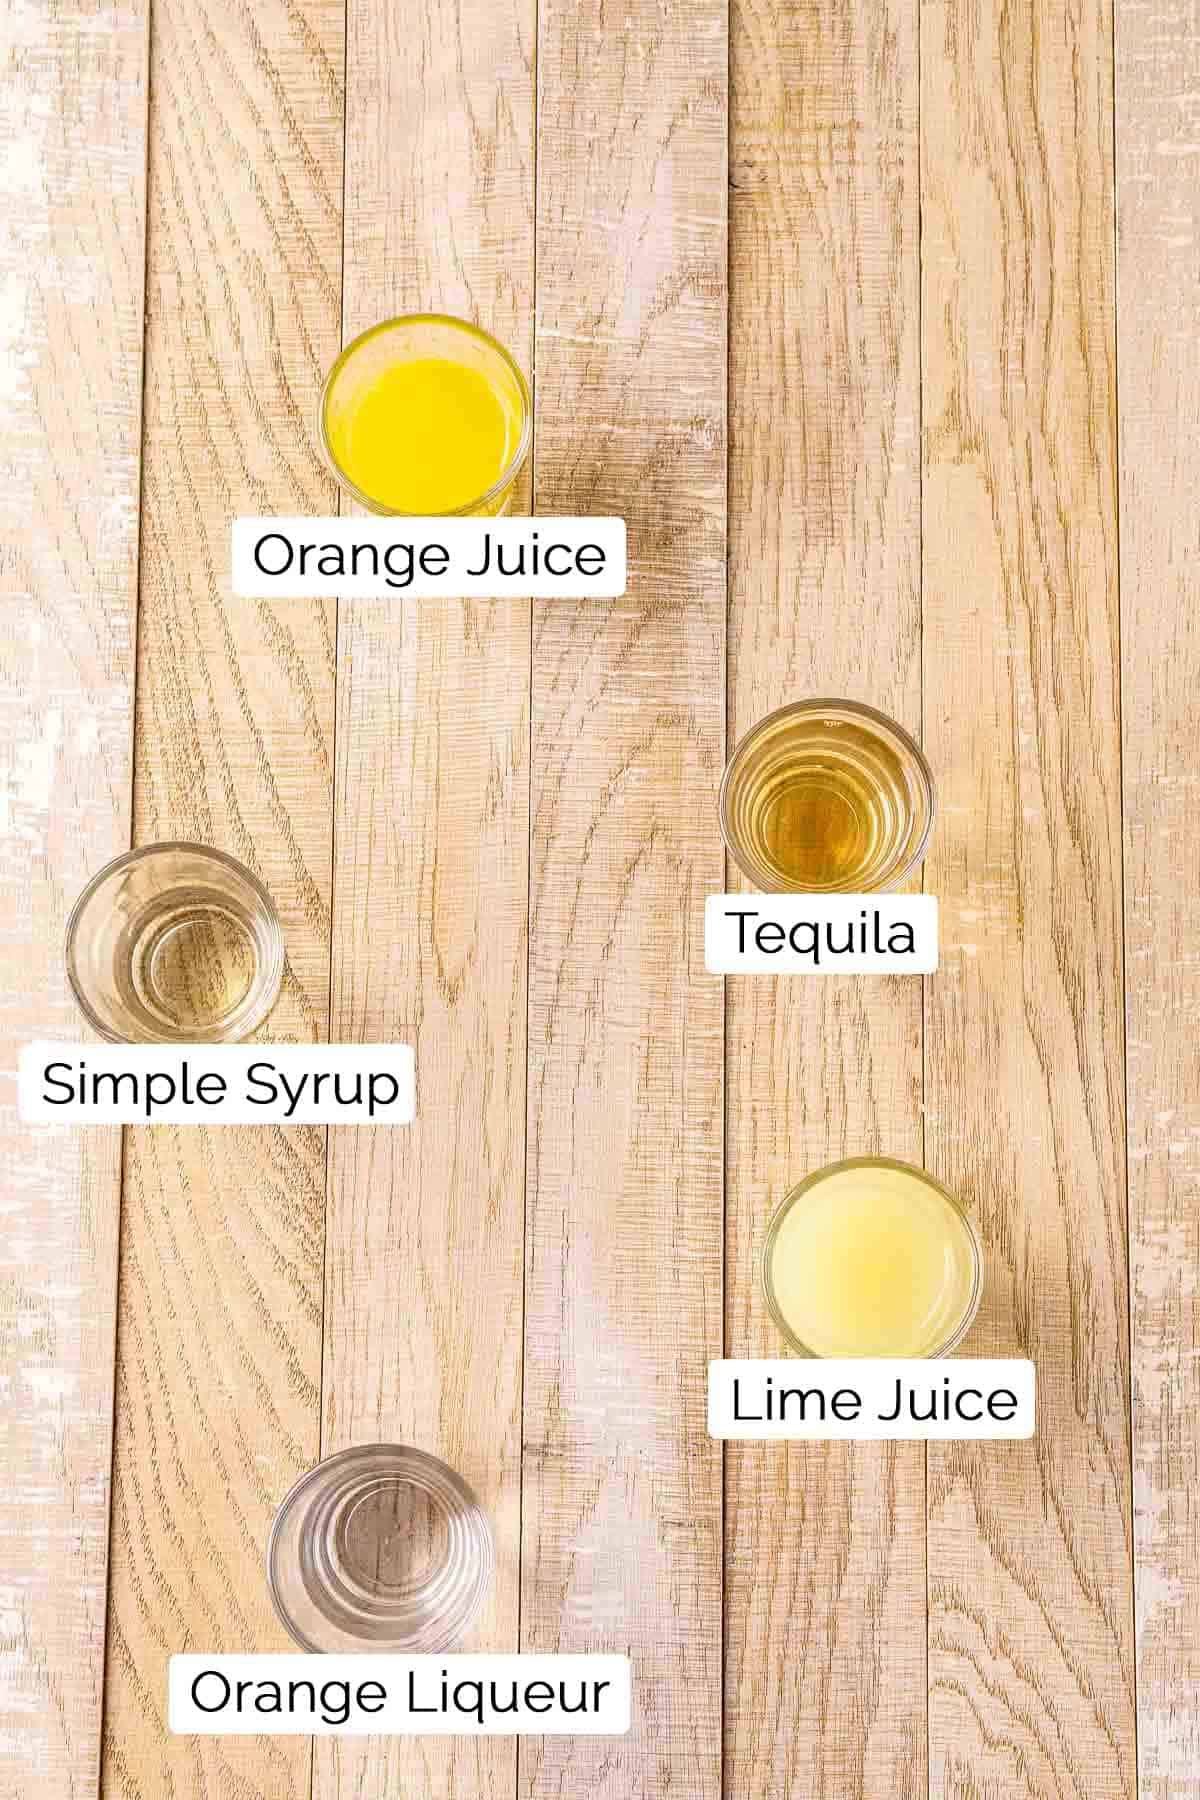 The five ingredients in shot glasses with black and white labels on a cream-colored wooden board.